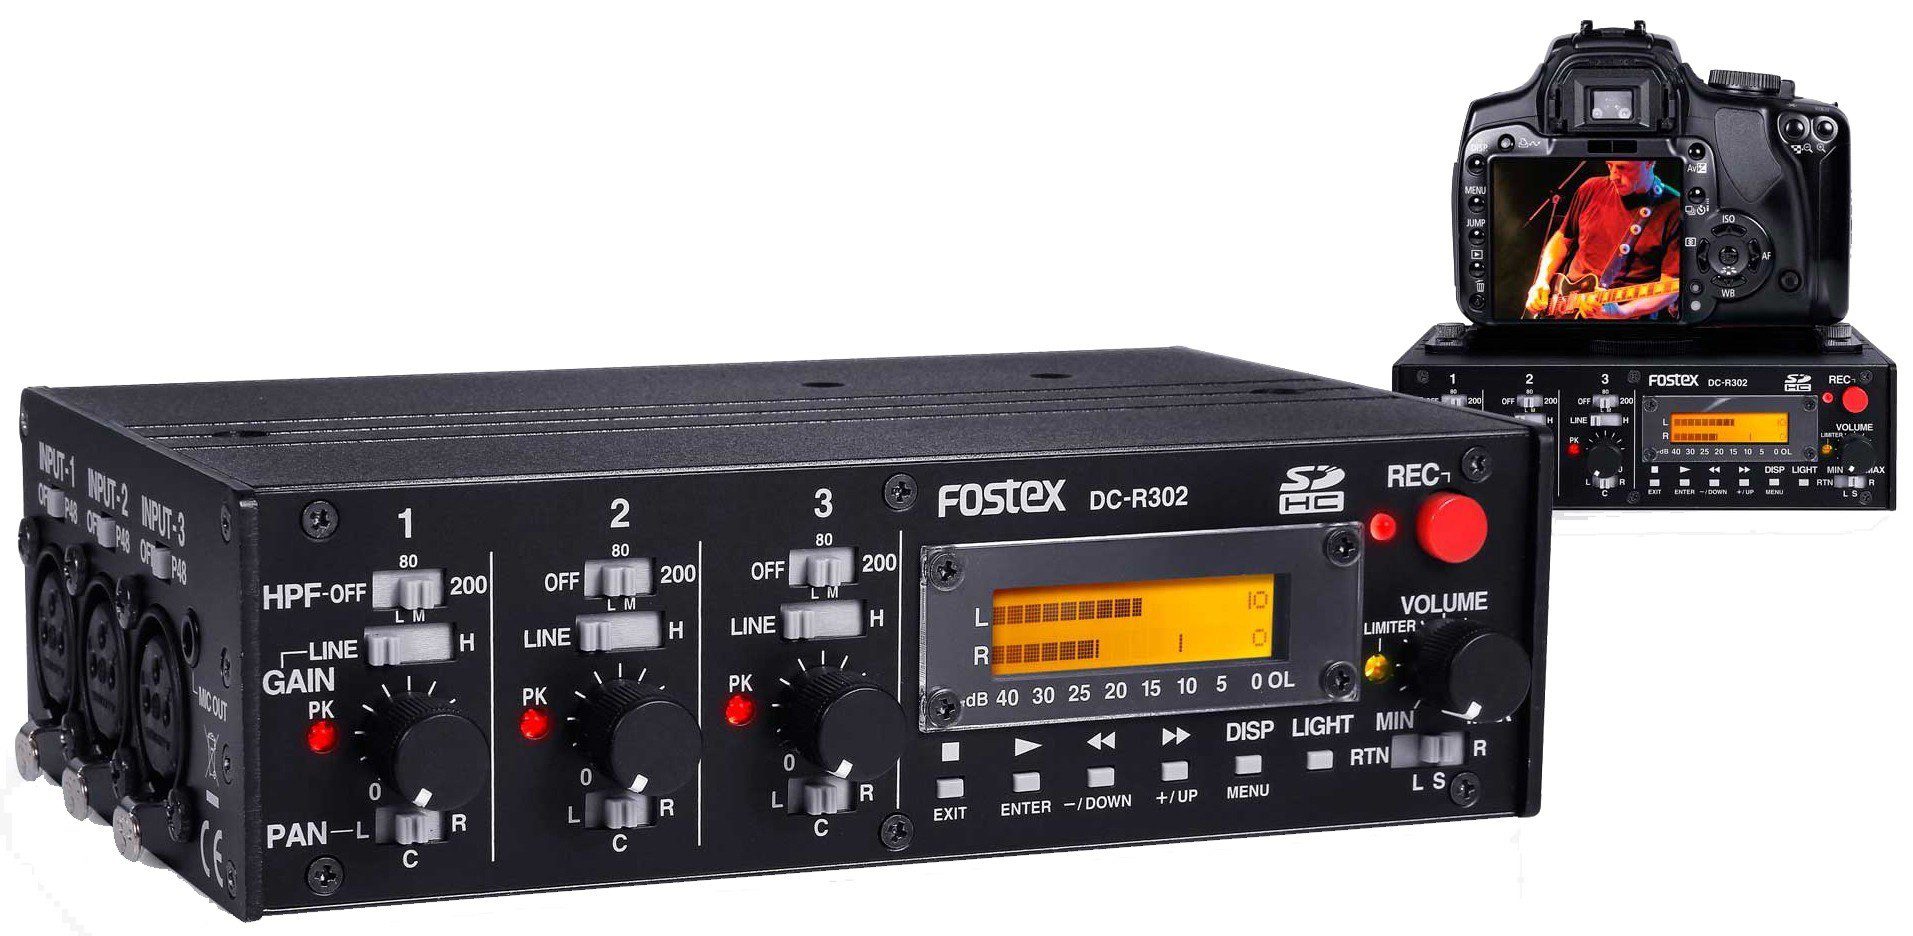 Fostex DC-R302 MIXER AND RECORDER